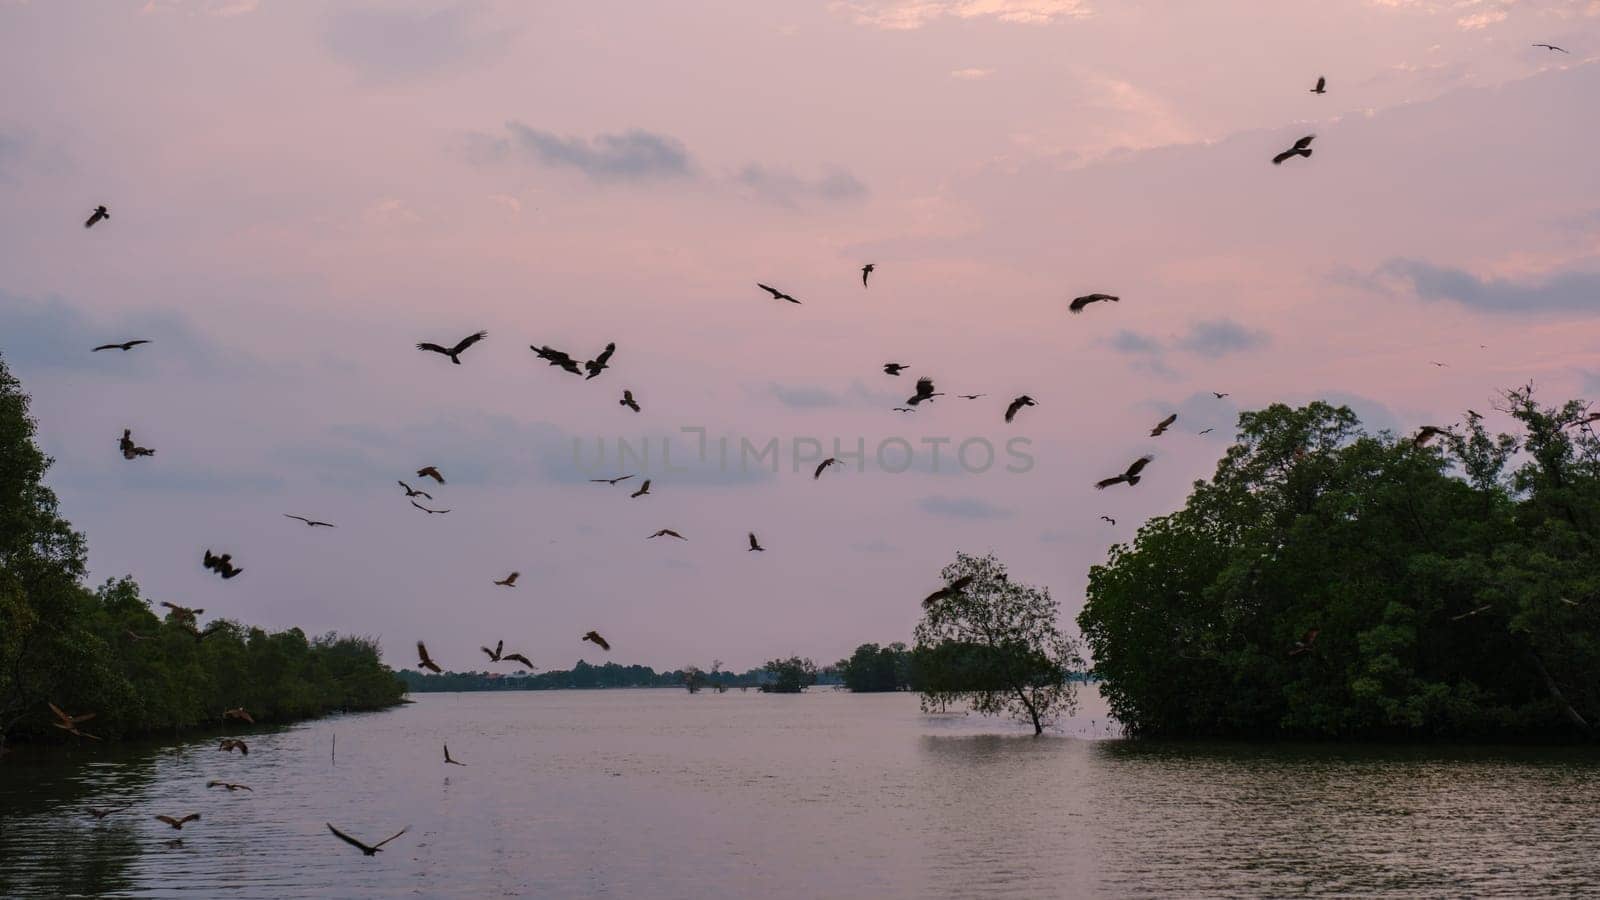 Sea Eagles at sunset in the mangrove of Chantaburi in Thailand, Red backed sea eagles at sunset over the mangrove forest